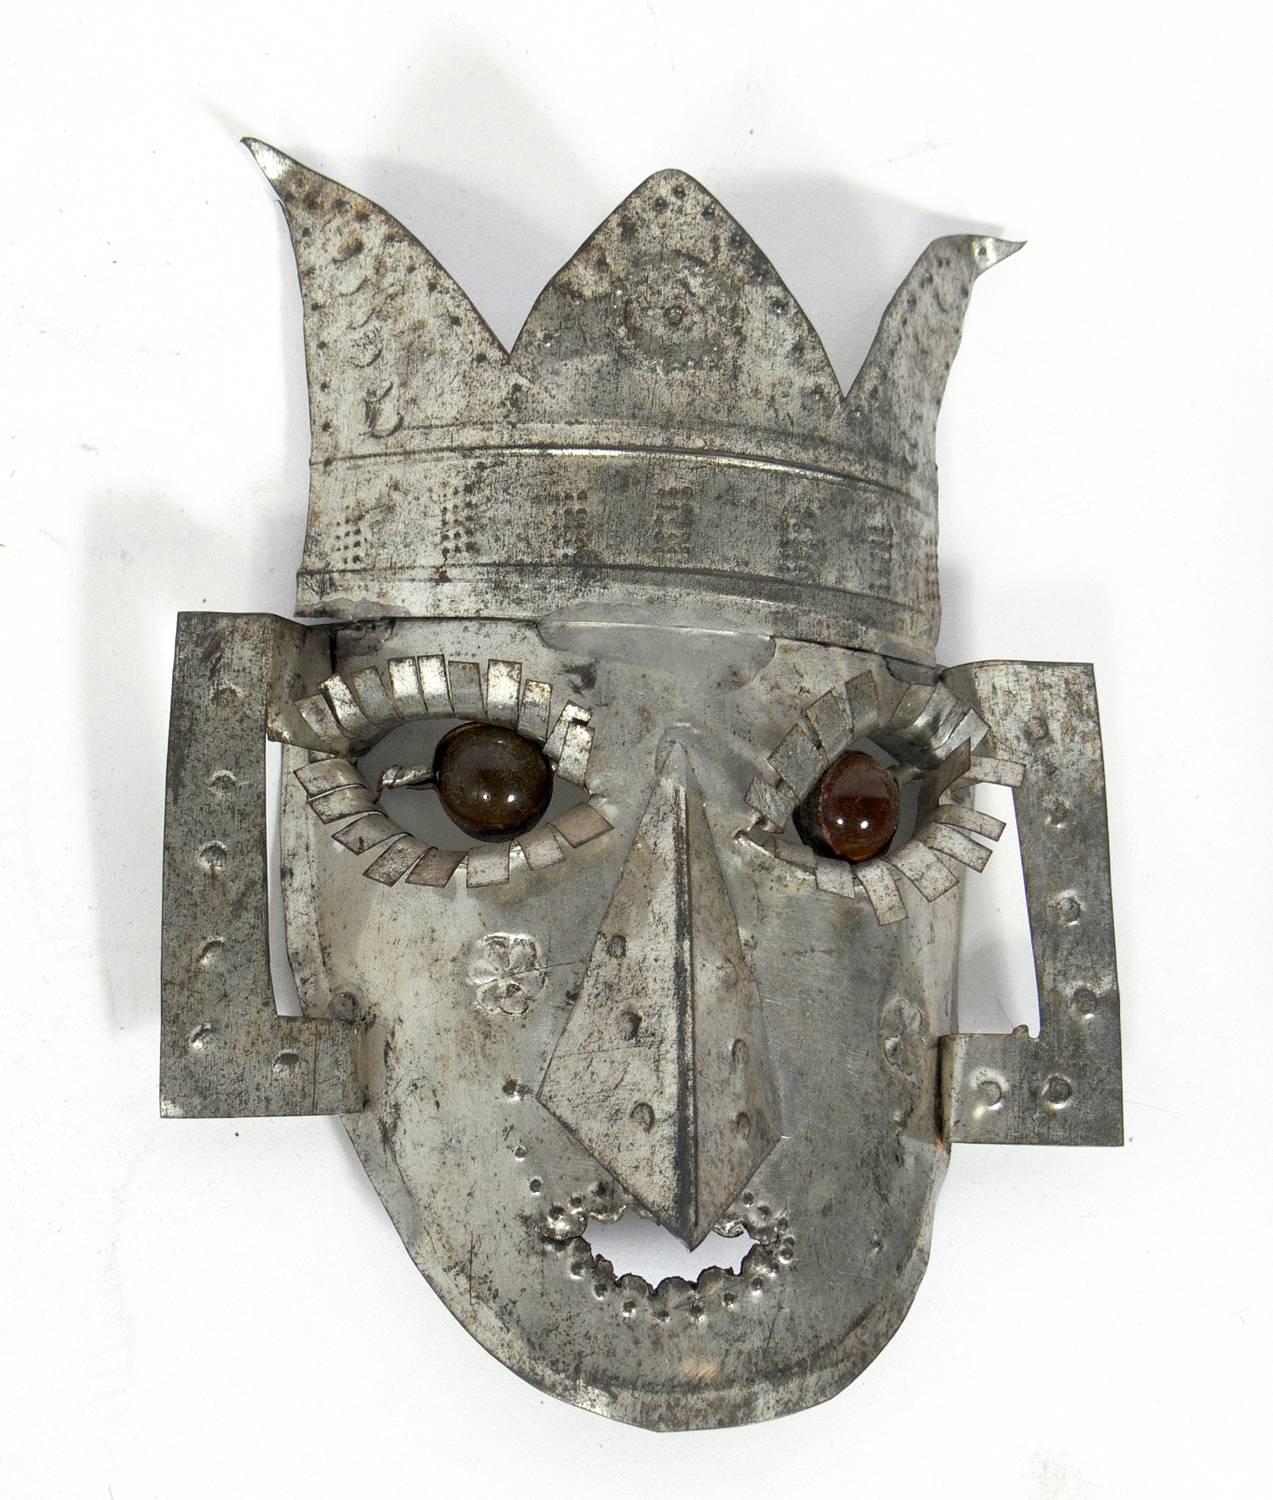 Copper Collection of Handmade Mexican Folk Art Masks